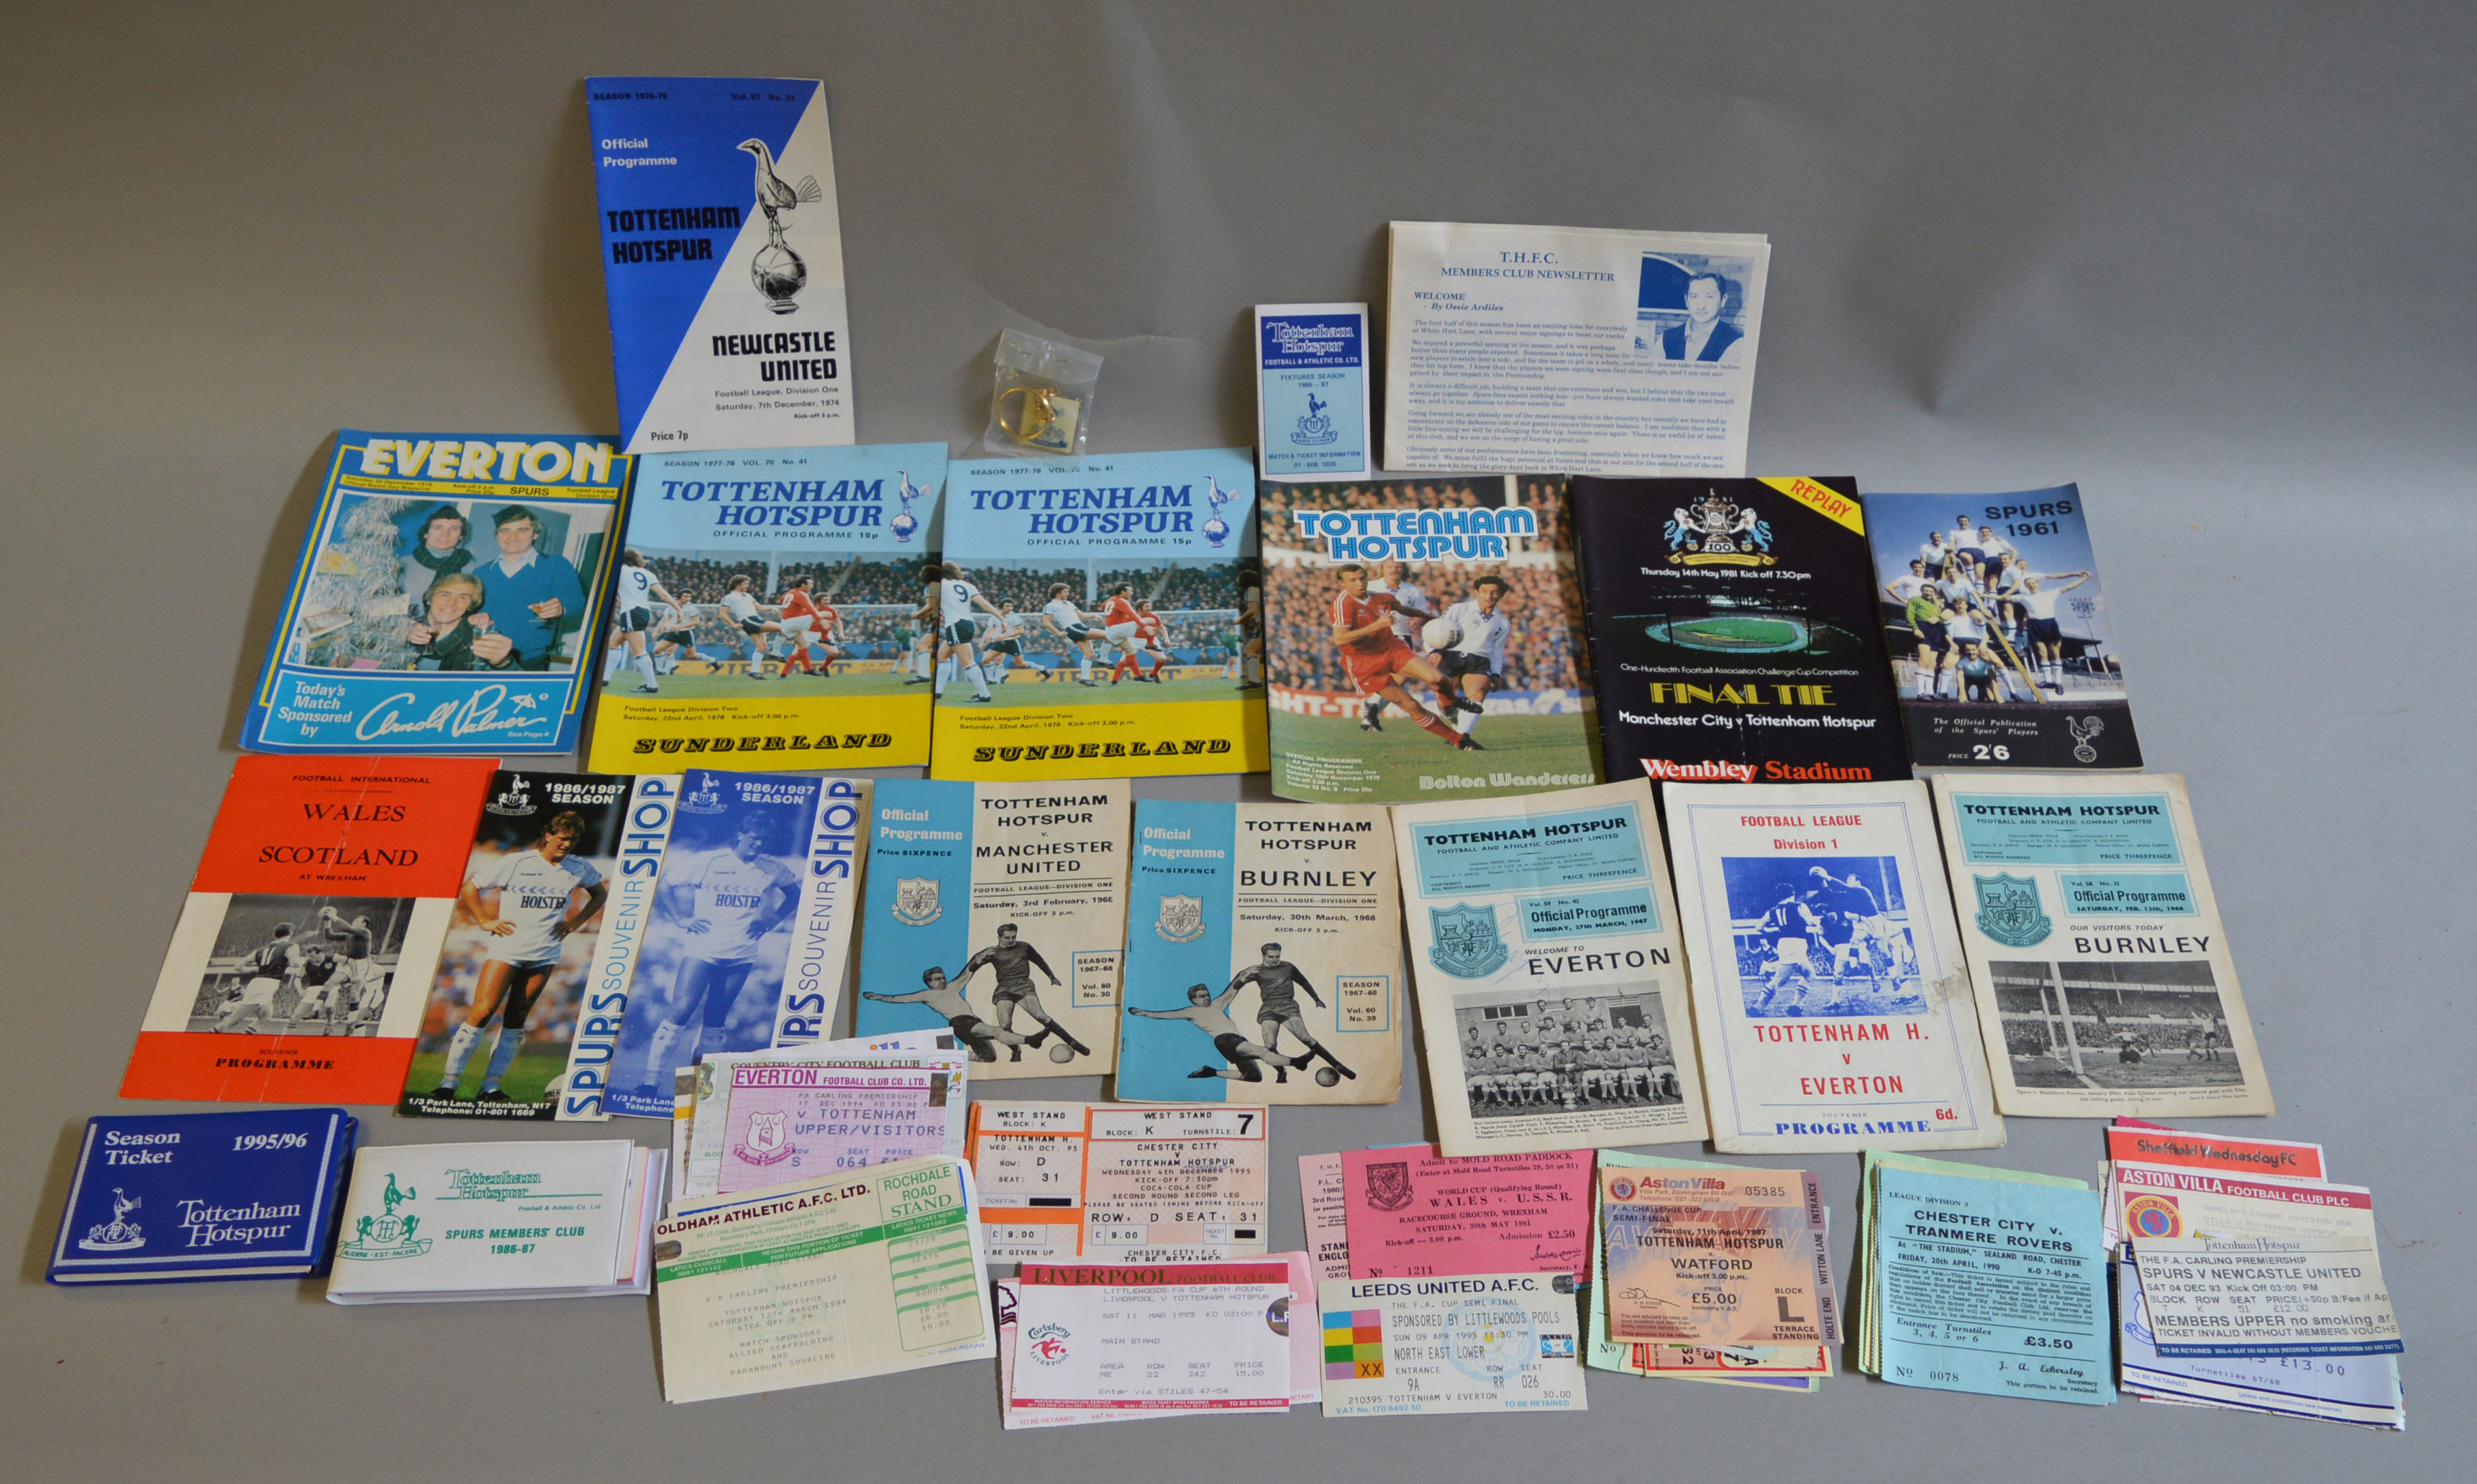 A quantity of Tottenham Hotspur FC memorabilia including vintage handbooks dating from the - Image 2 of 3